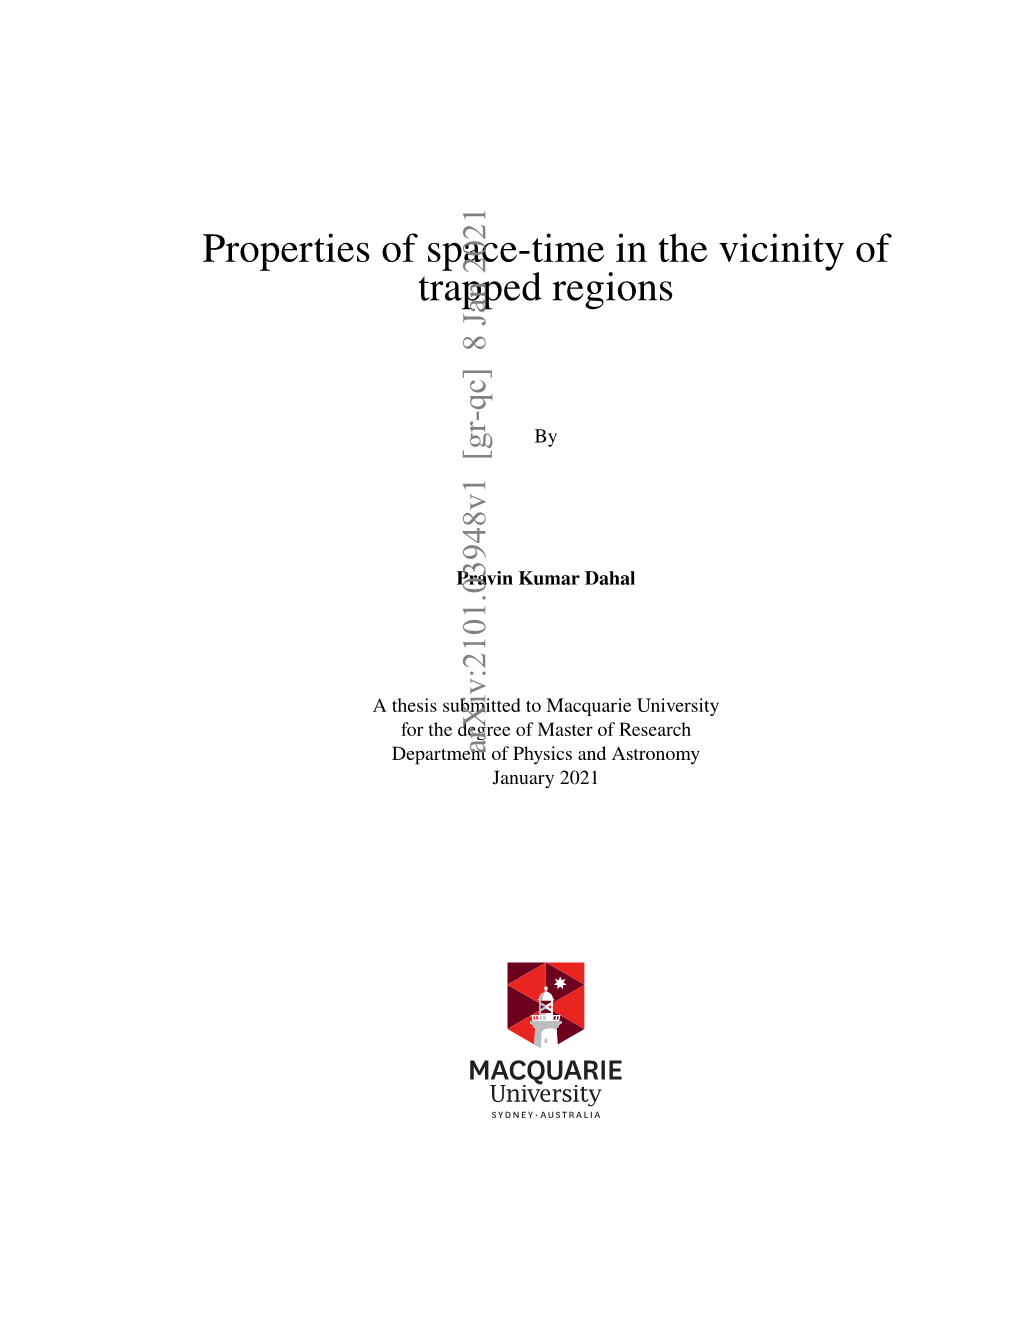 Properties of Space-Time in the Vicinity of Trapped Regions